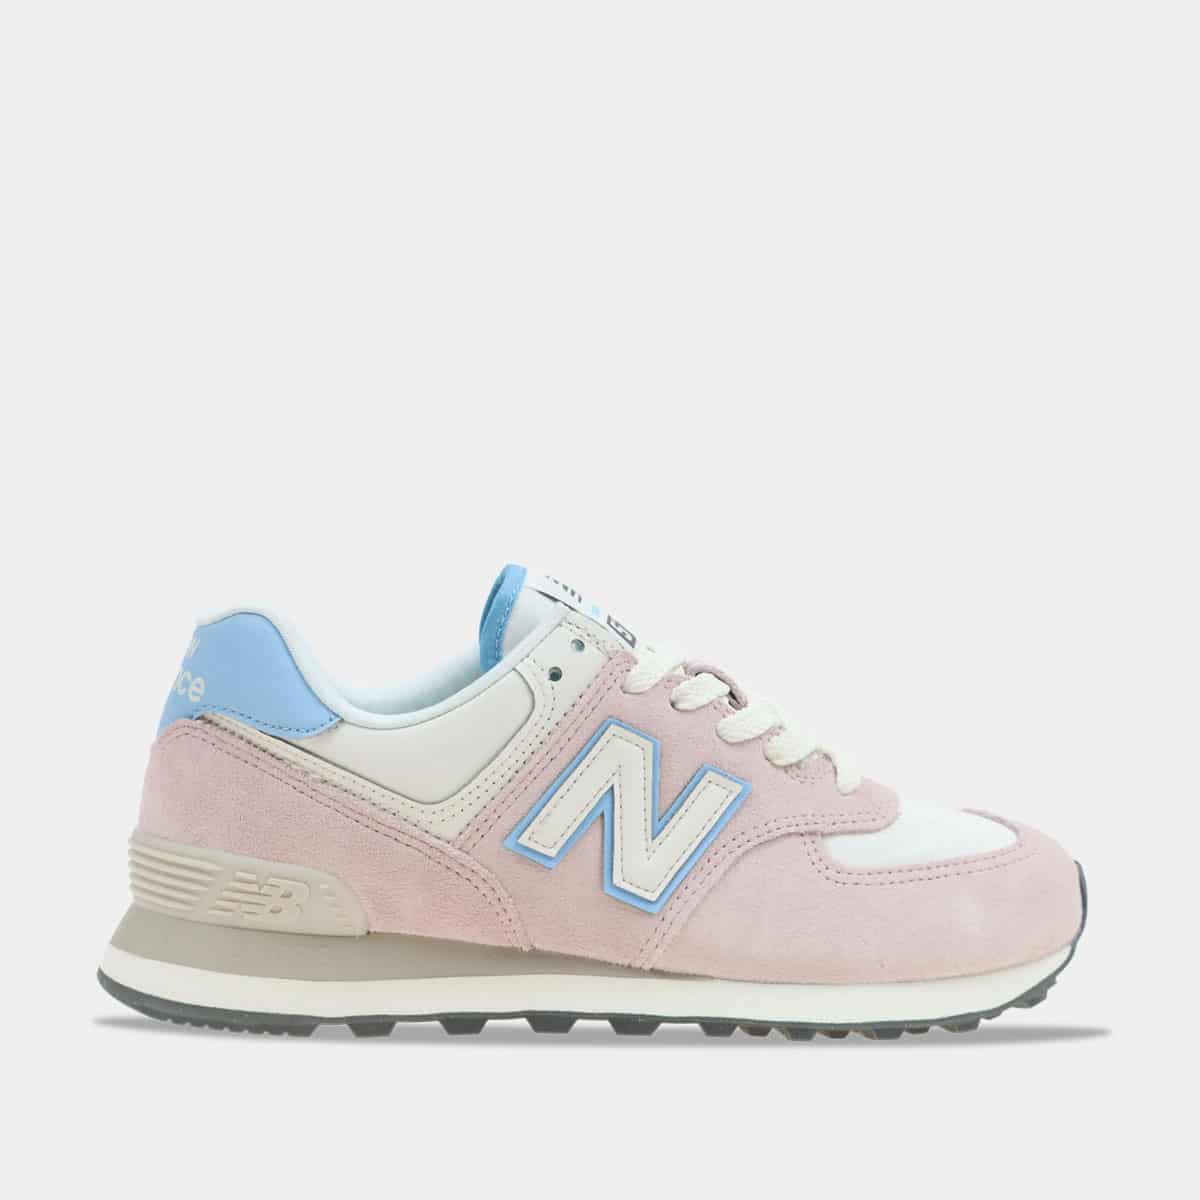 New Balance 574 Pink/Blue dames sneakers